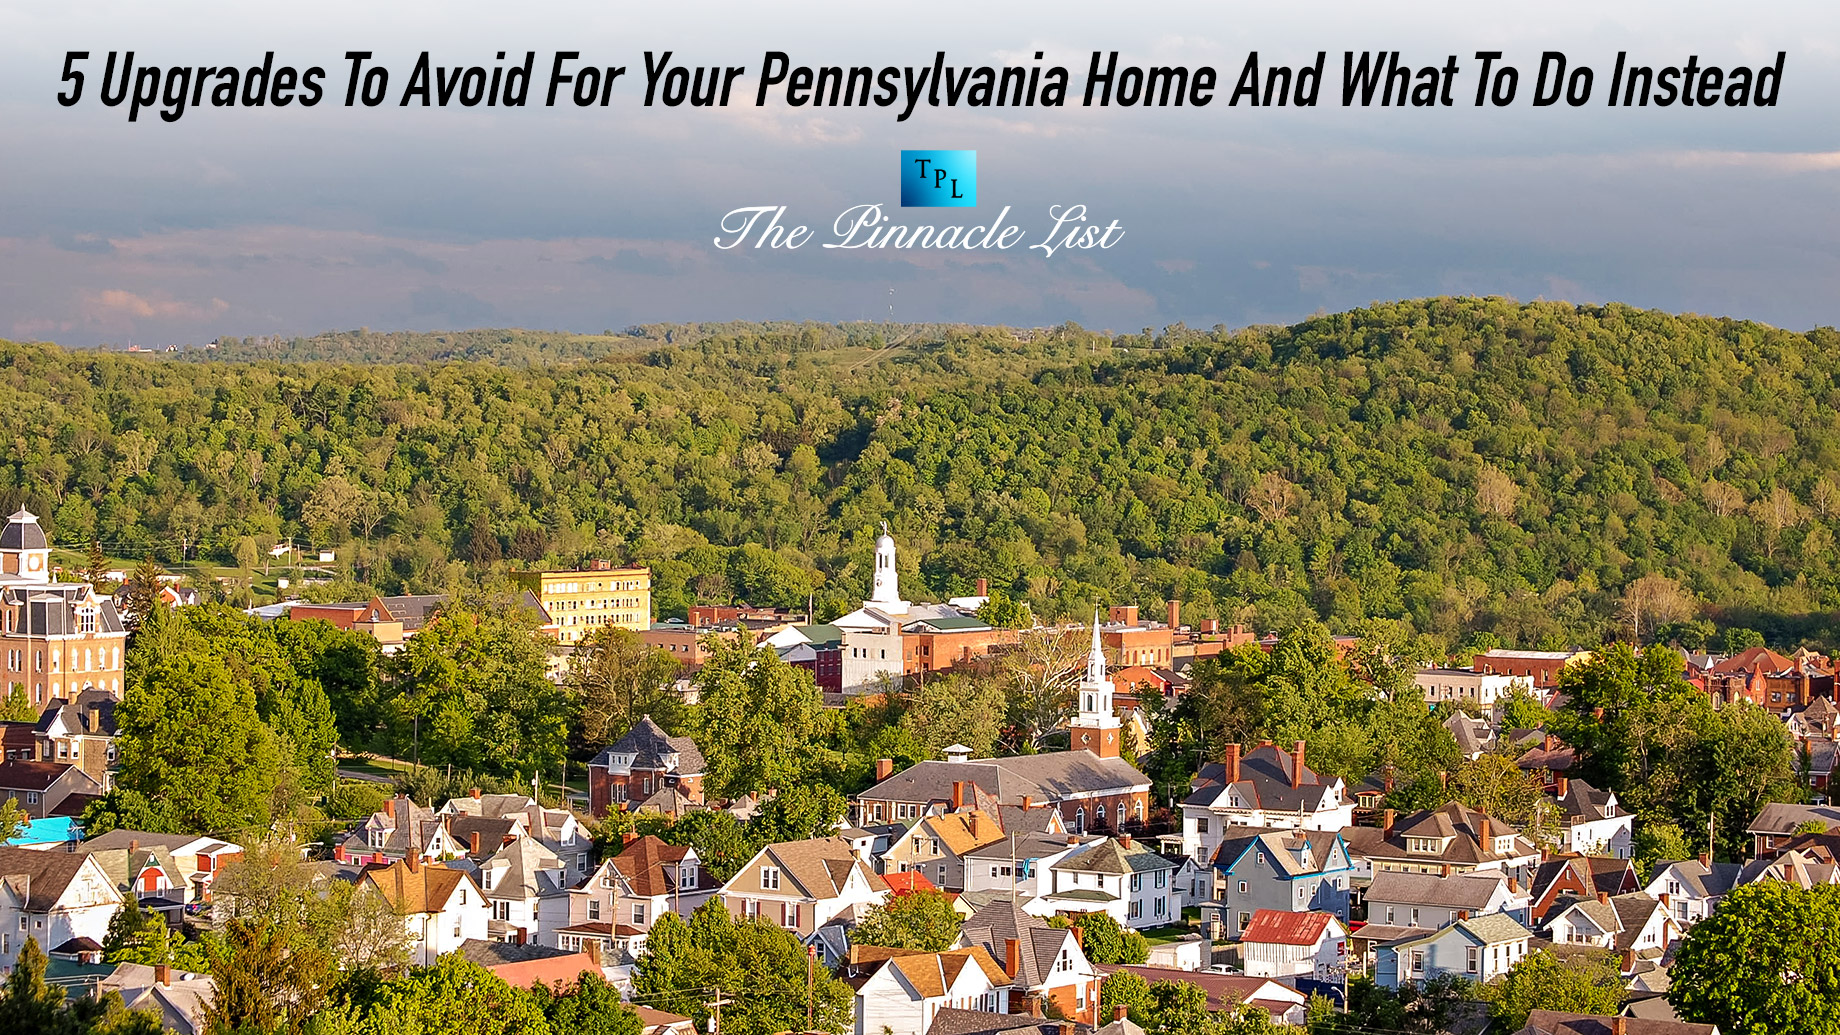 5 Upgrades To Avoid For Your Pennsylvania Home And What To Do Instead